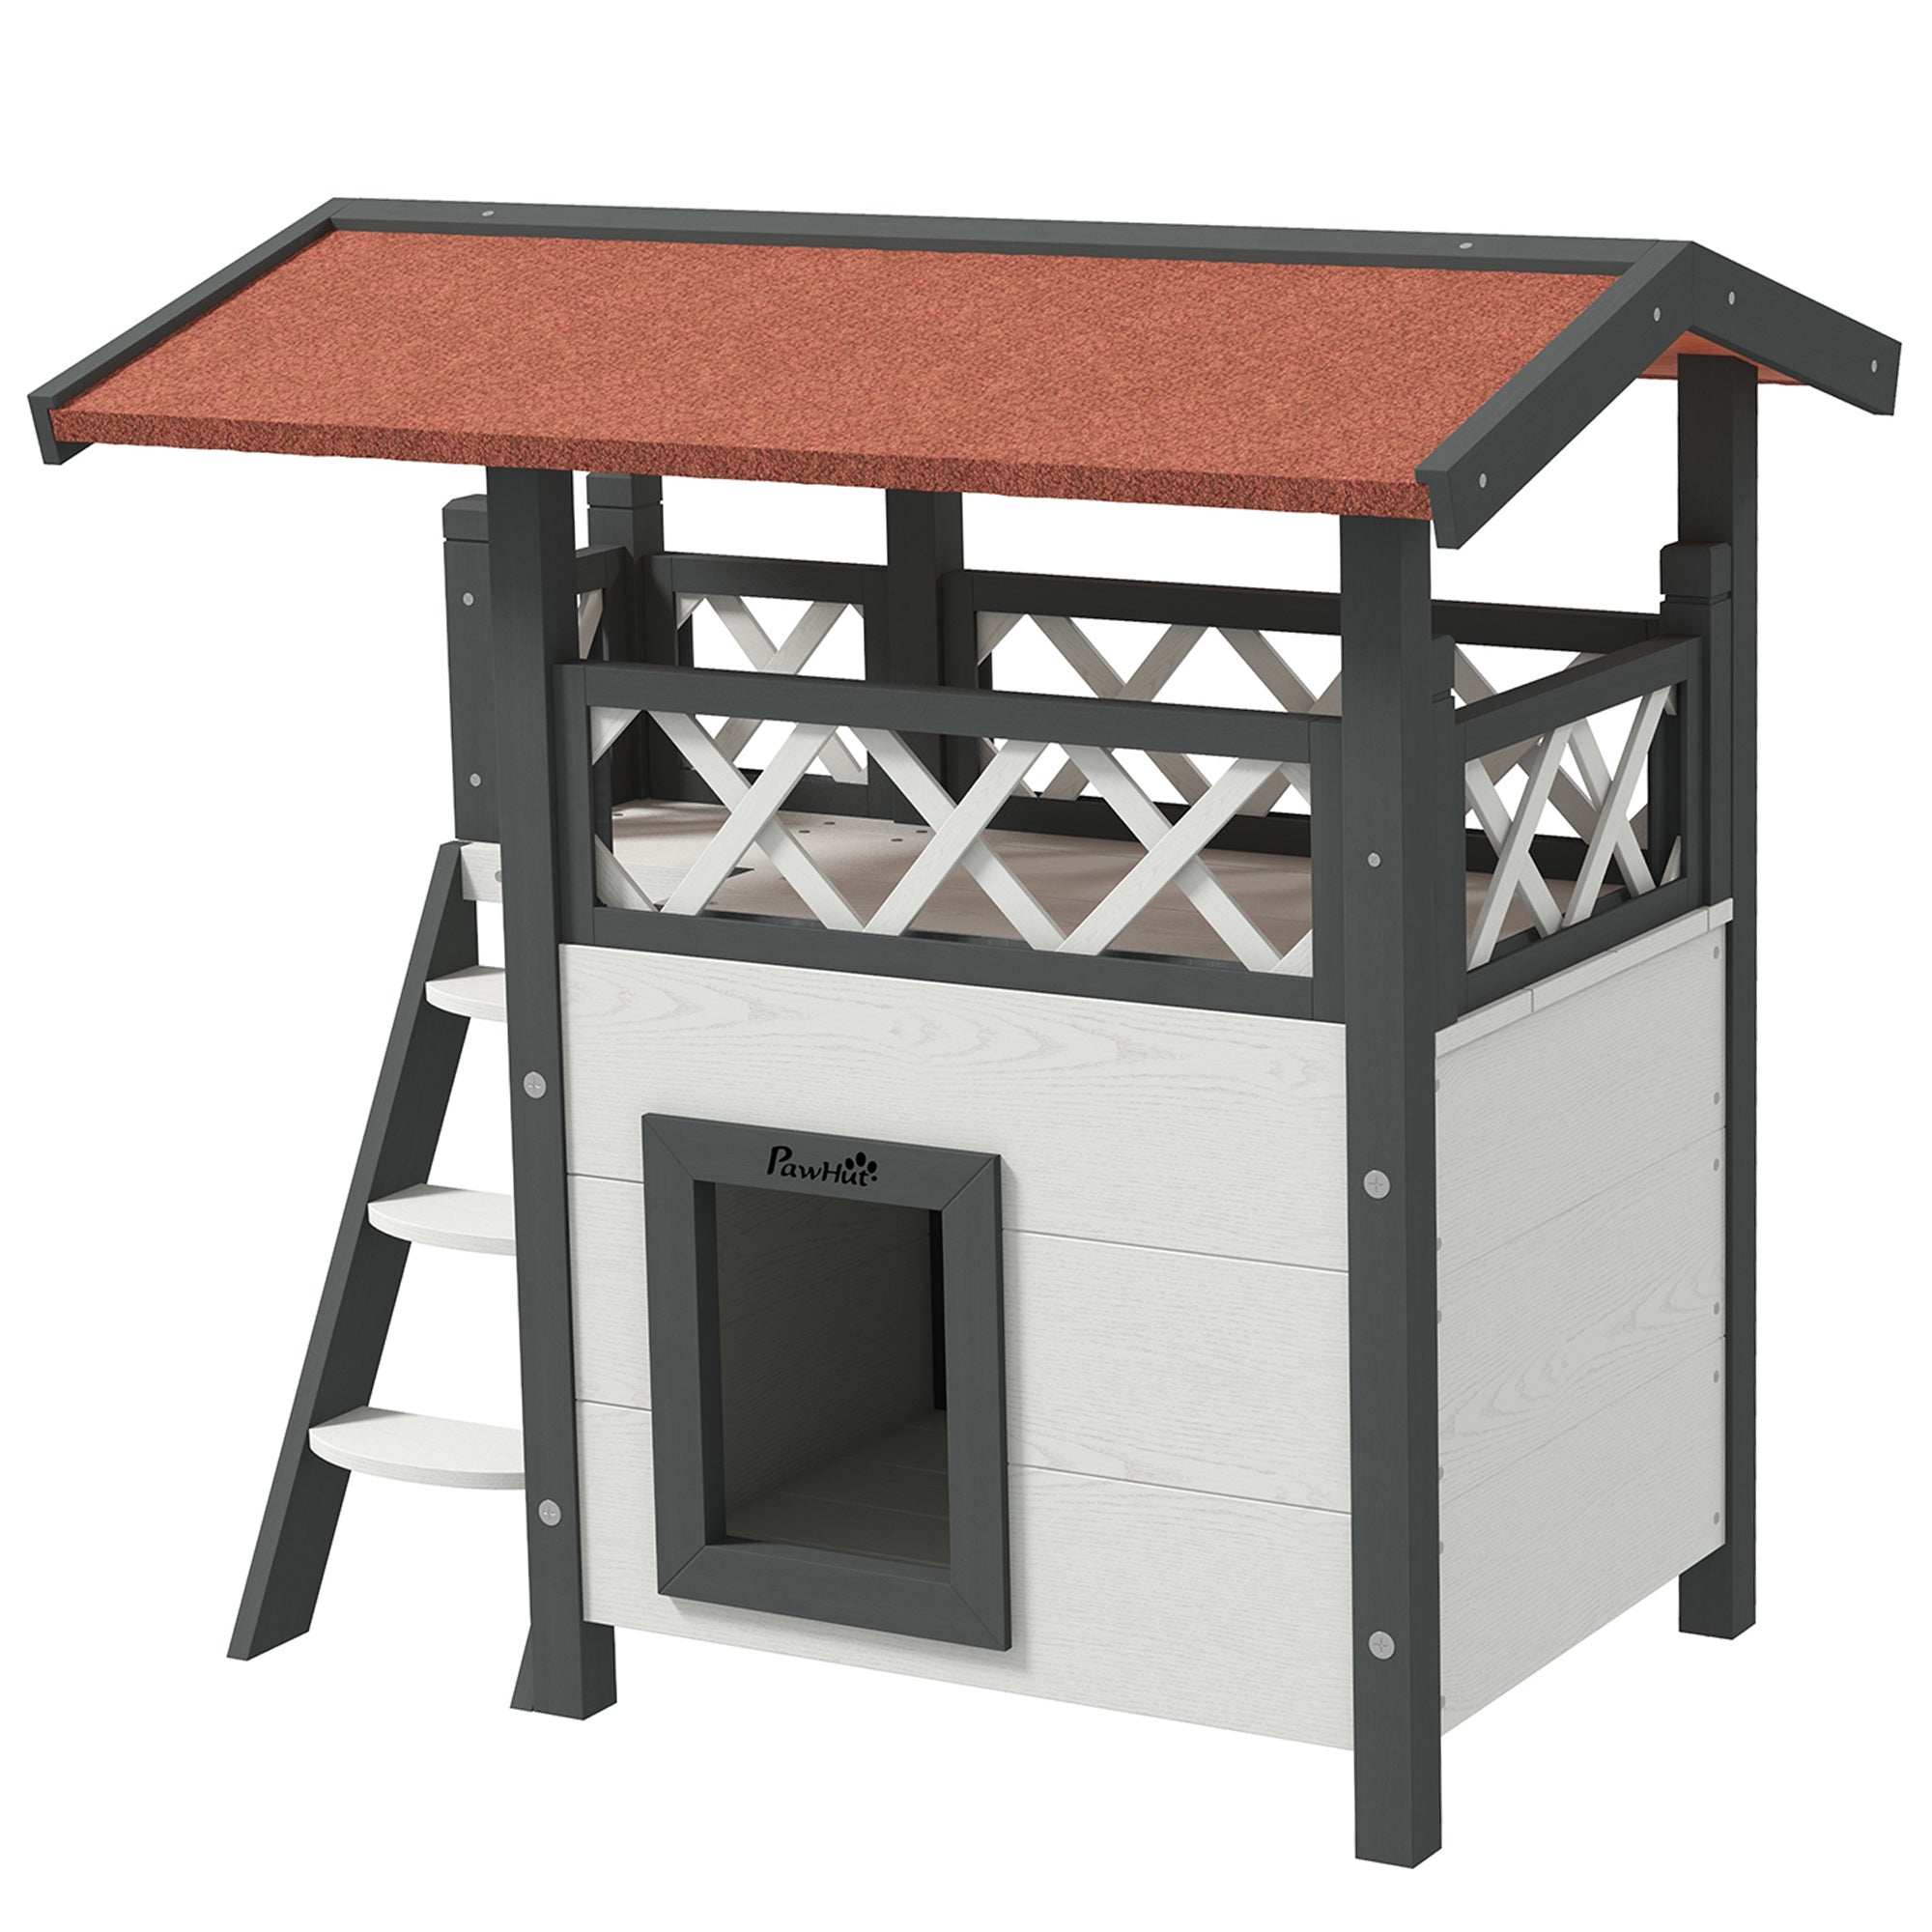 Outdoor Cat House with Balcony & Asphalt Roof | Cats up to 4 kg, PawHut, White